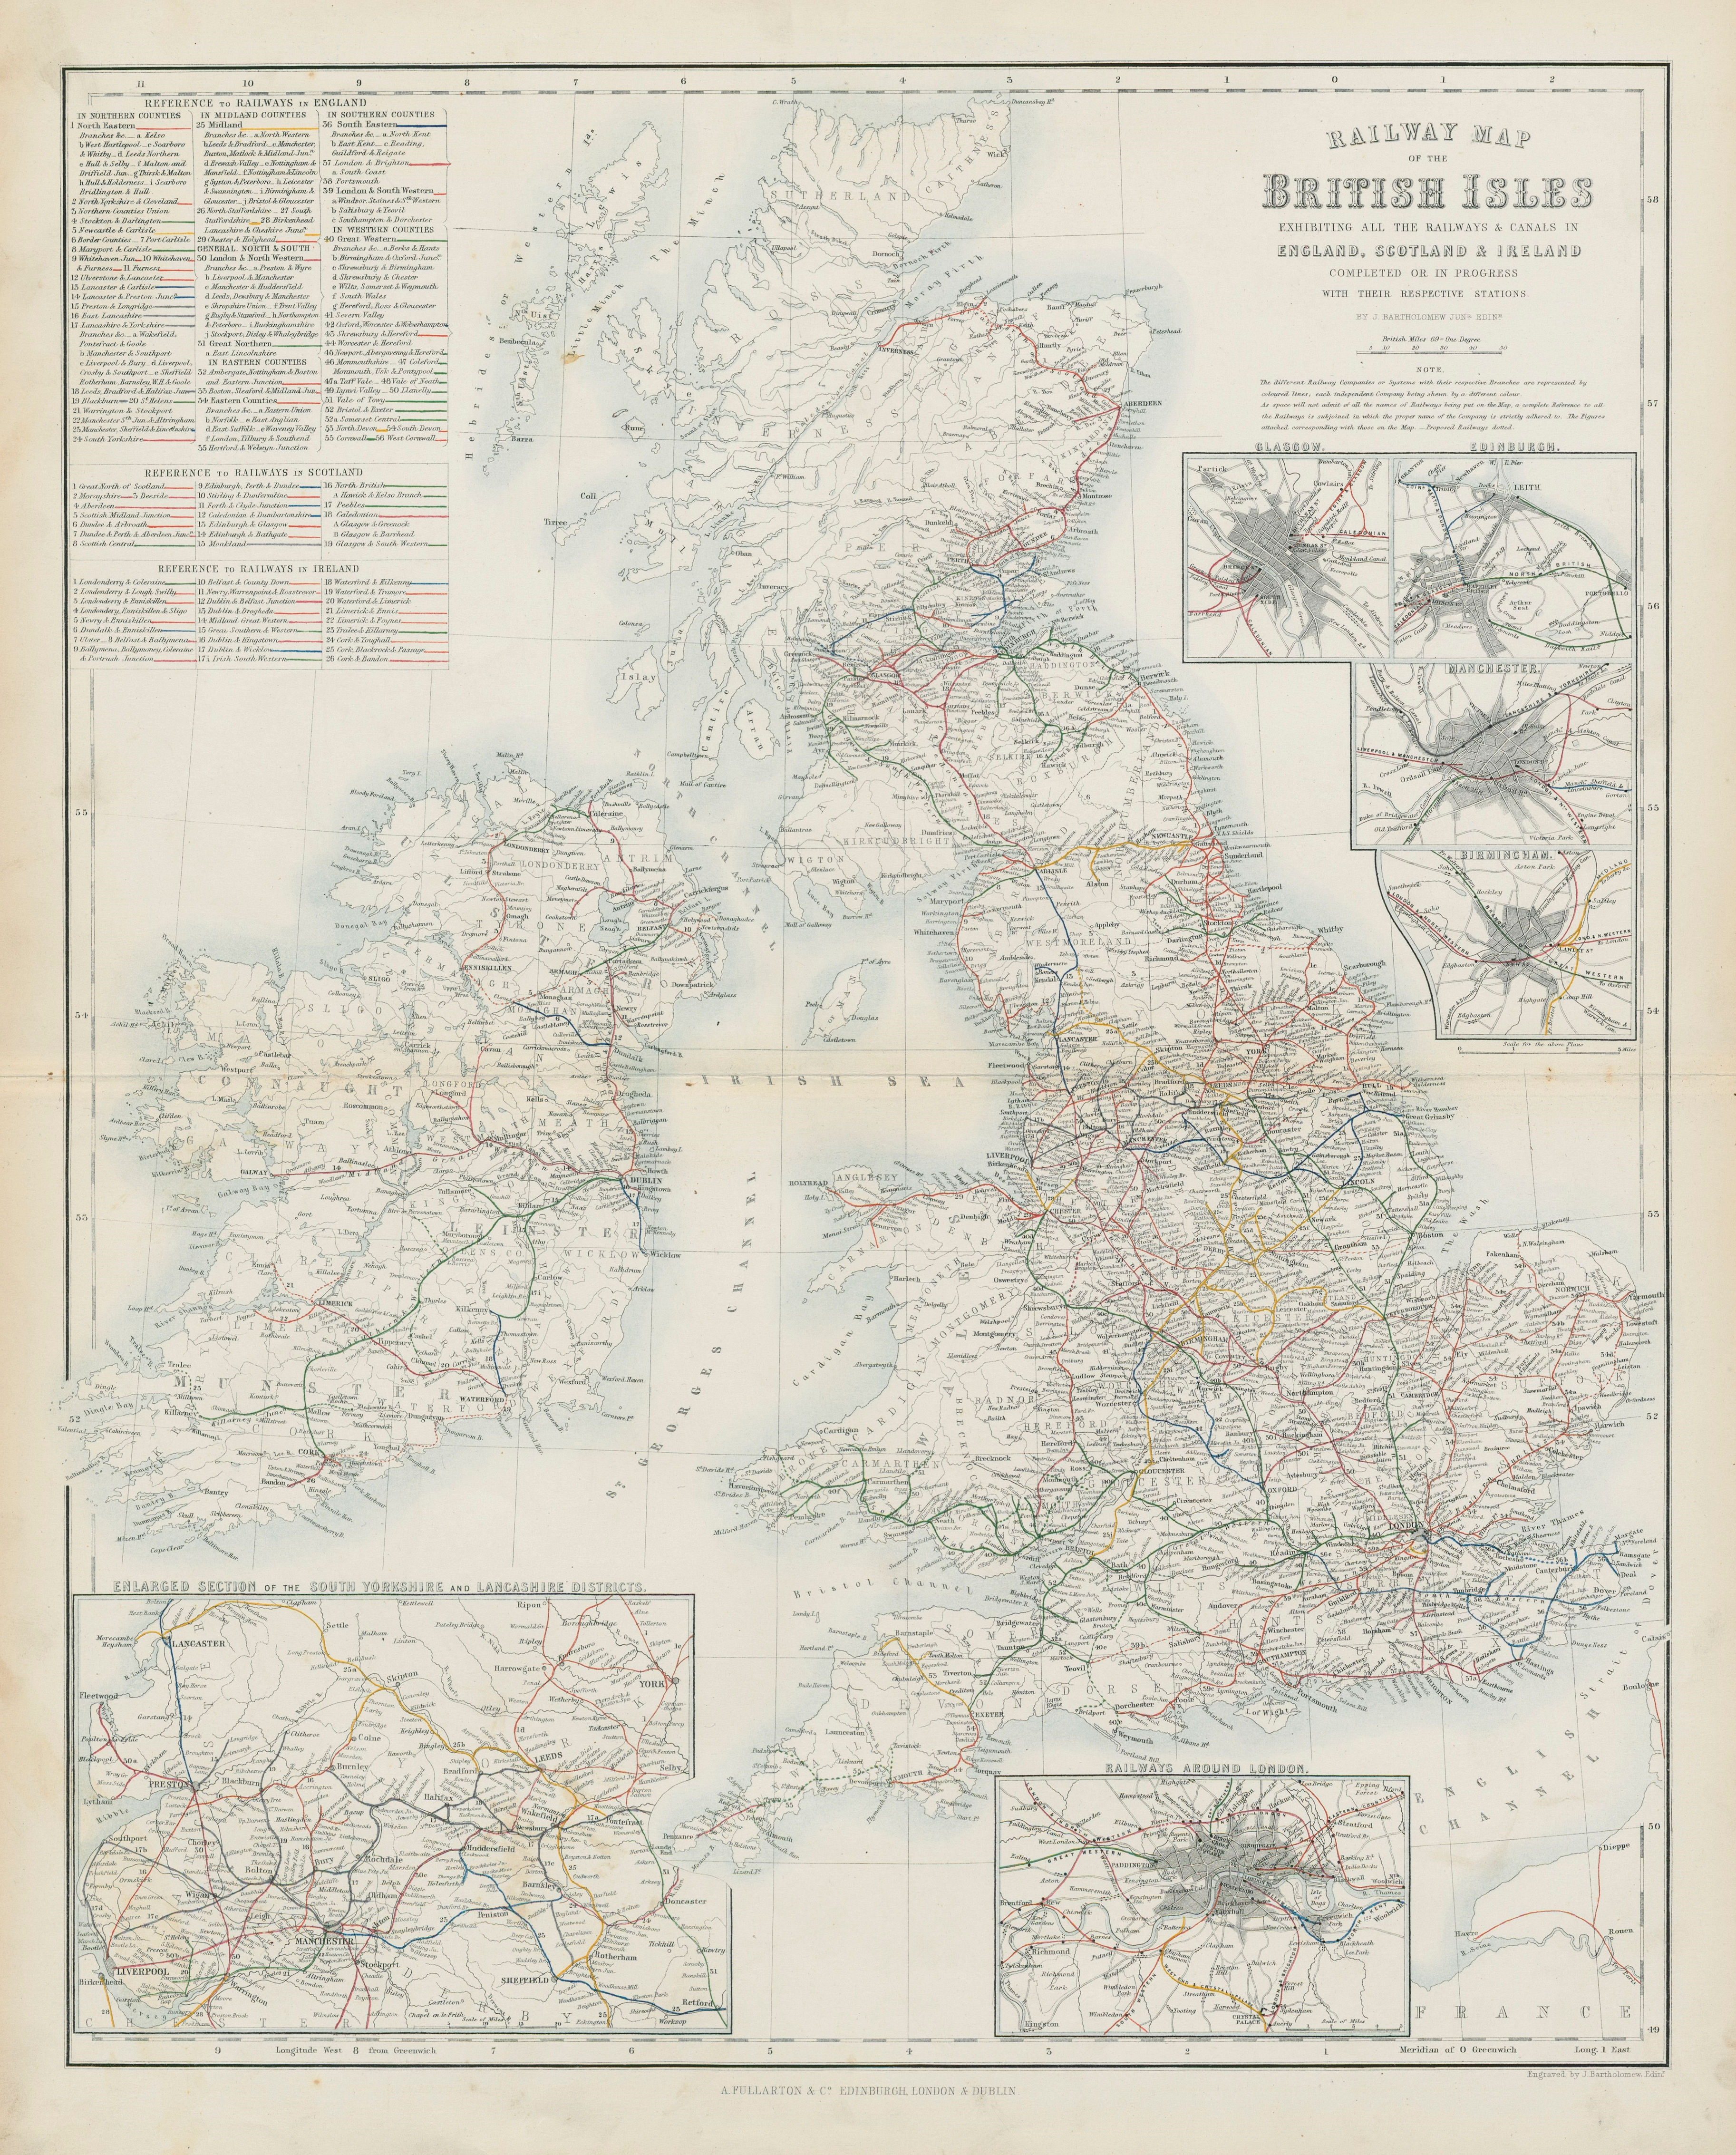 Associate Product Railway Map of the British Isles. SWANSTON 1860 old antique plan chart